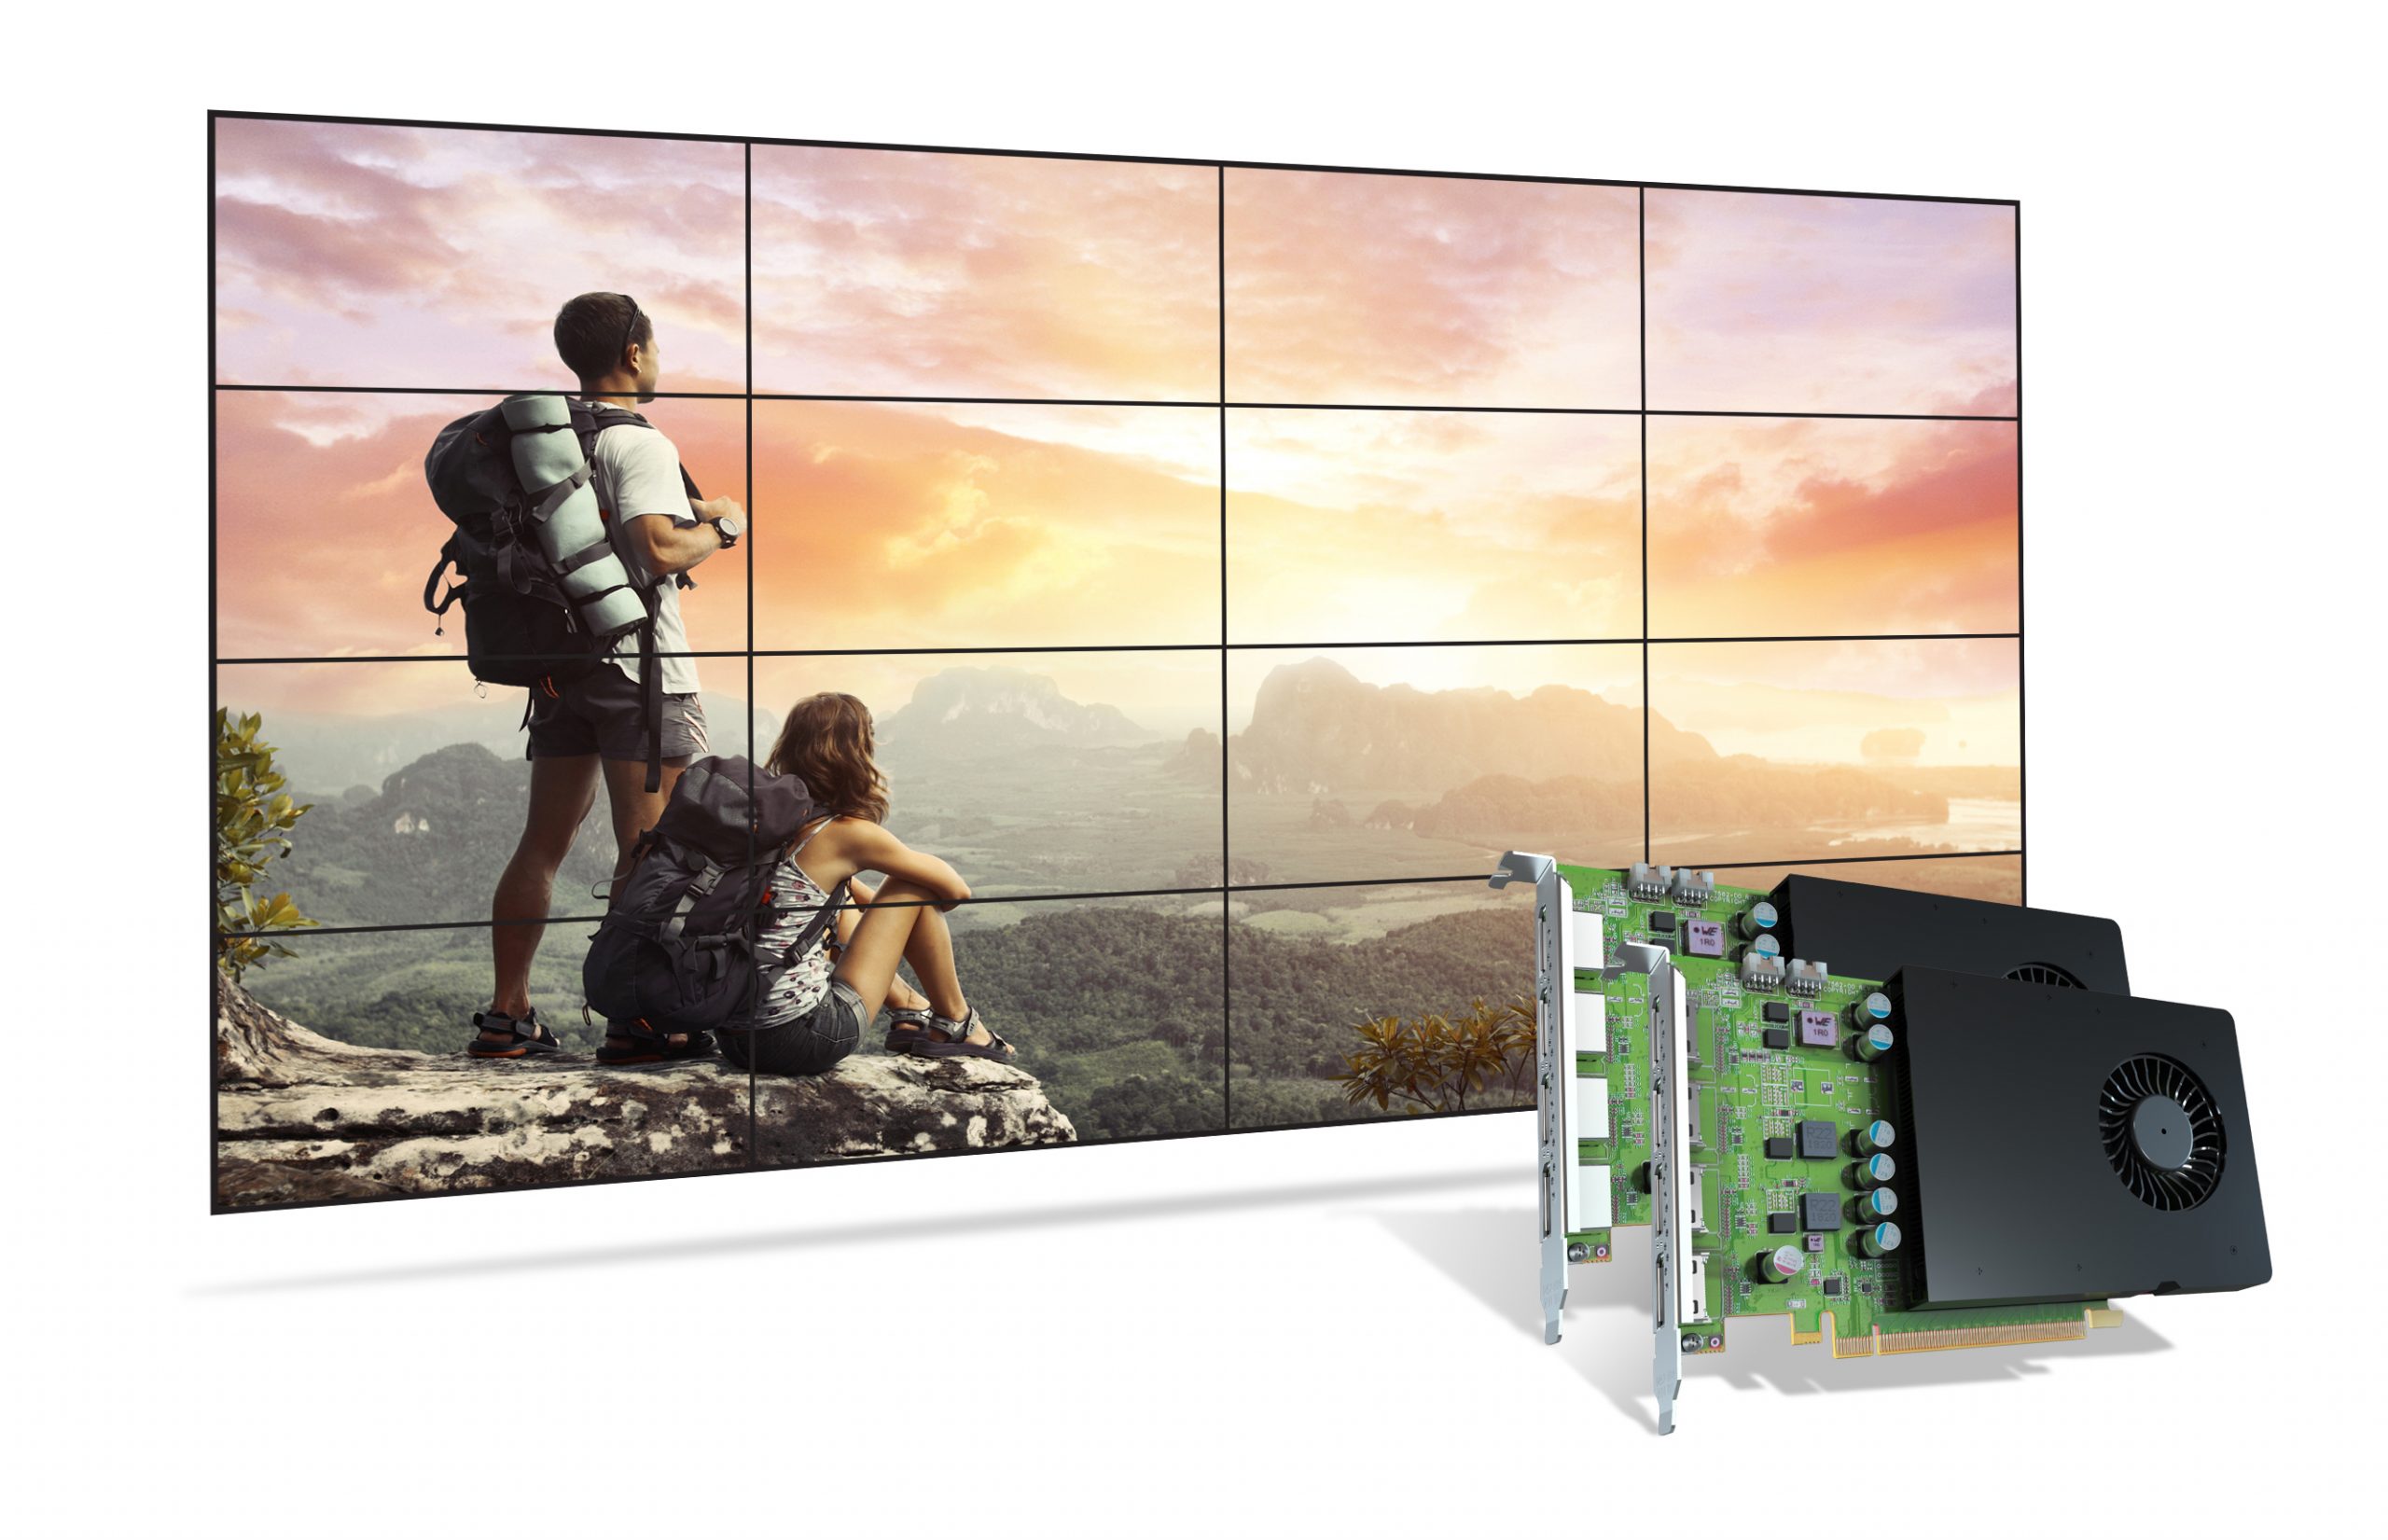 Ise 2020 Matrox To Flaunt D Series Graphics Cards